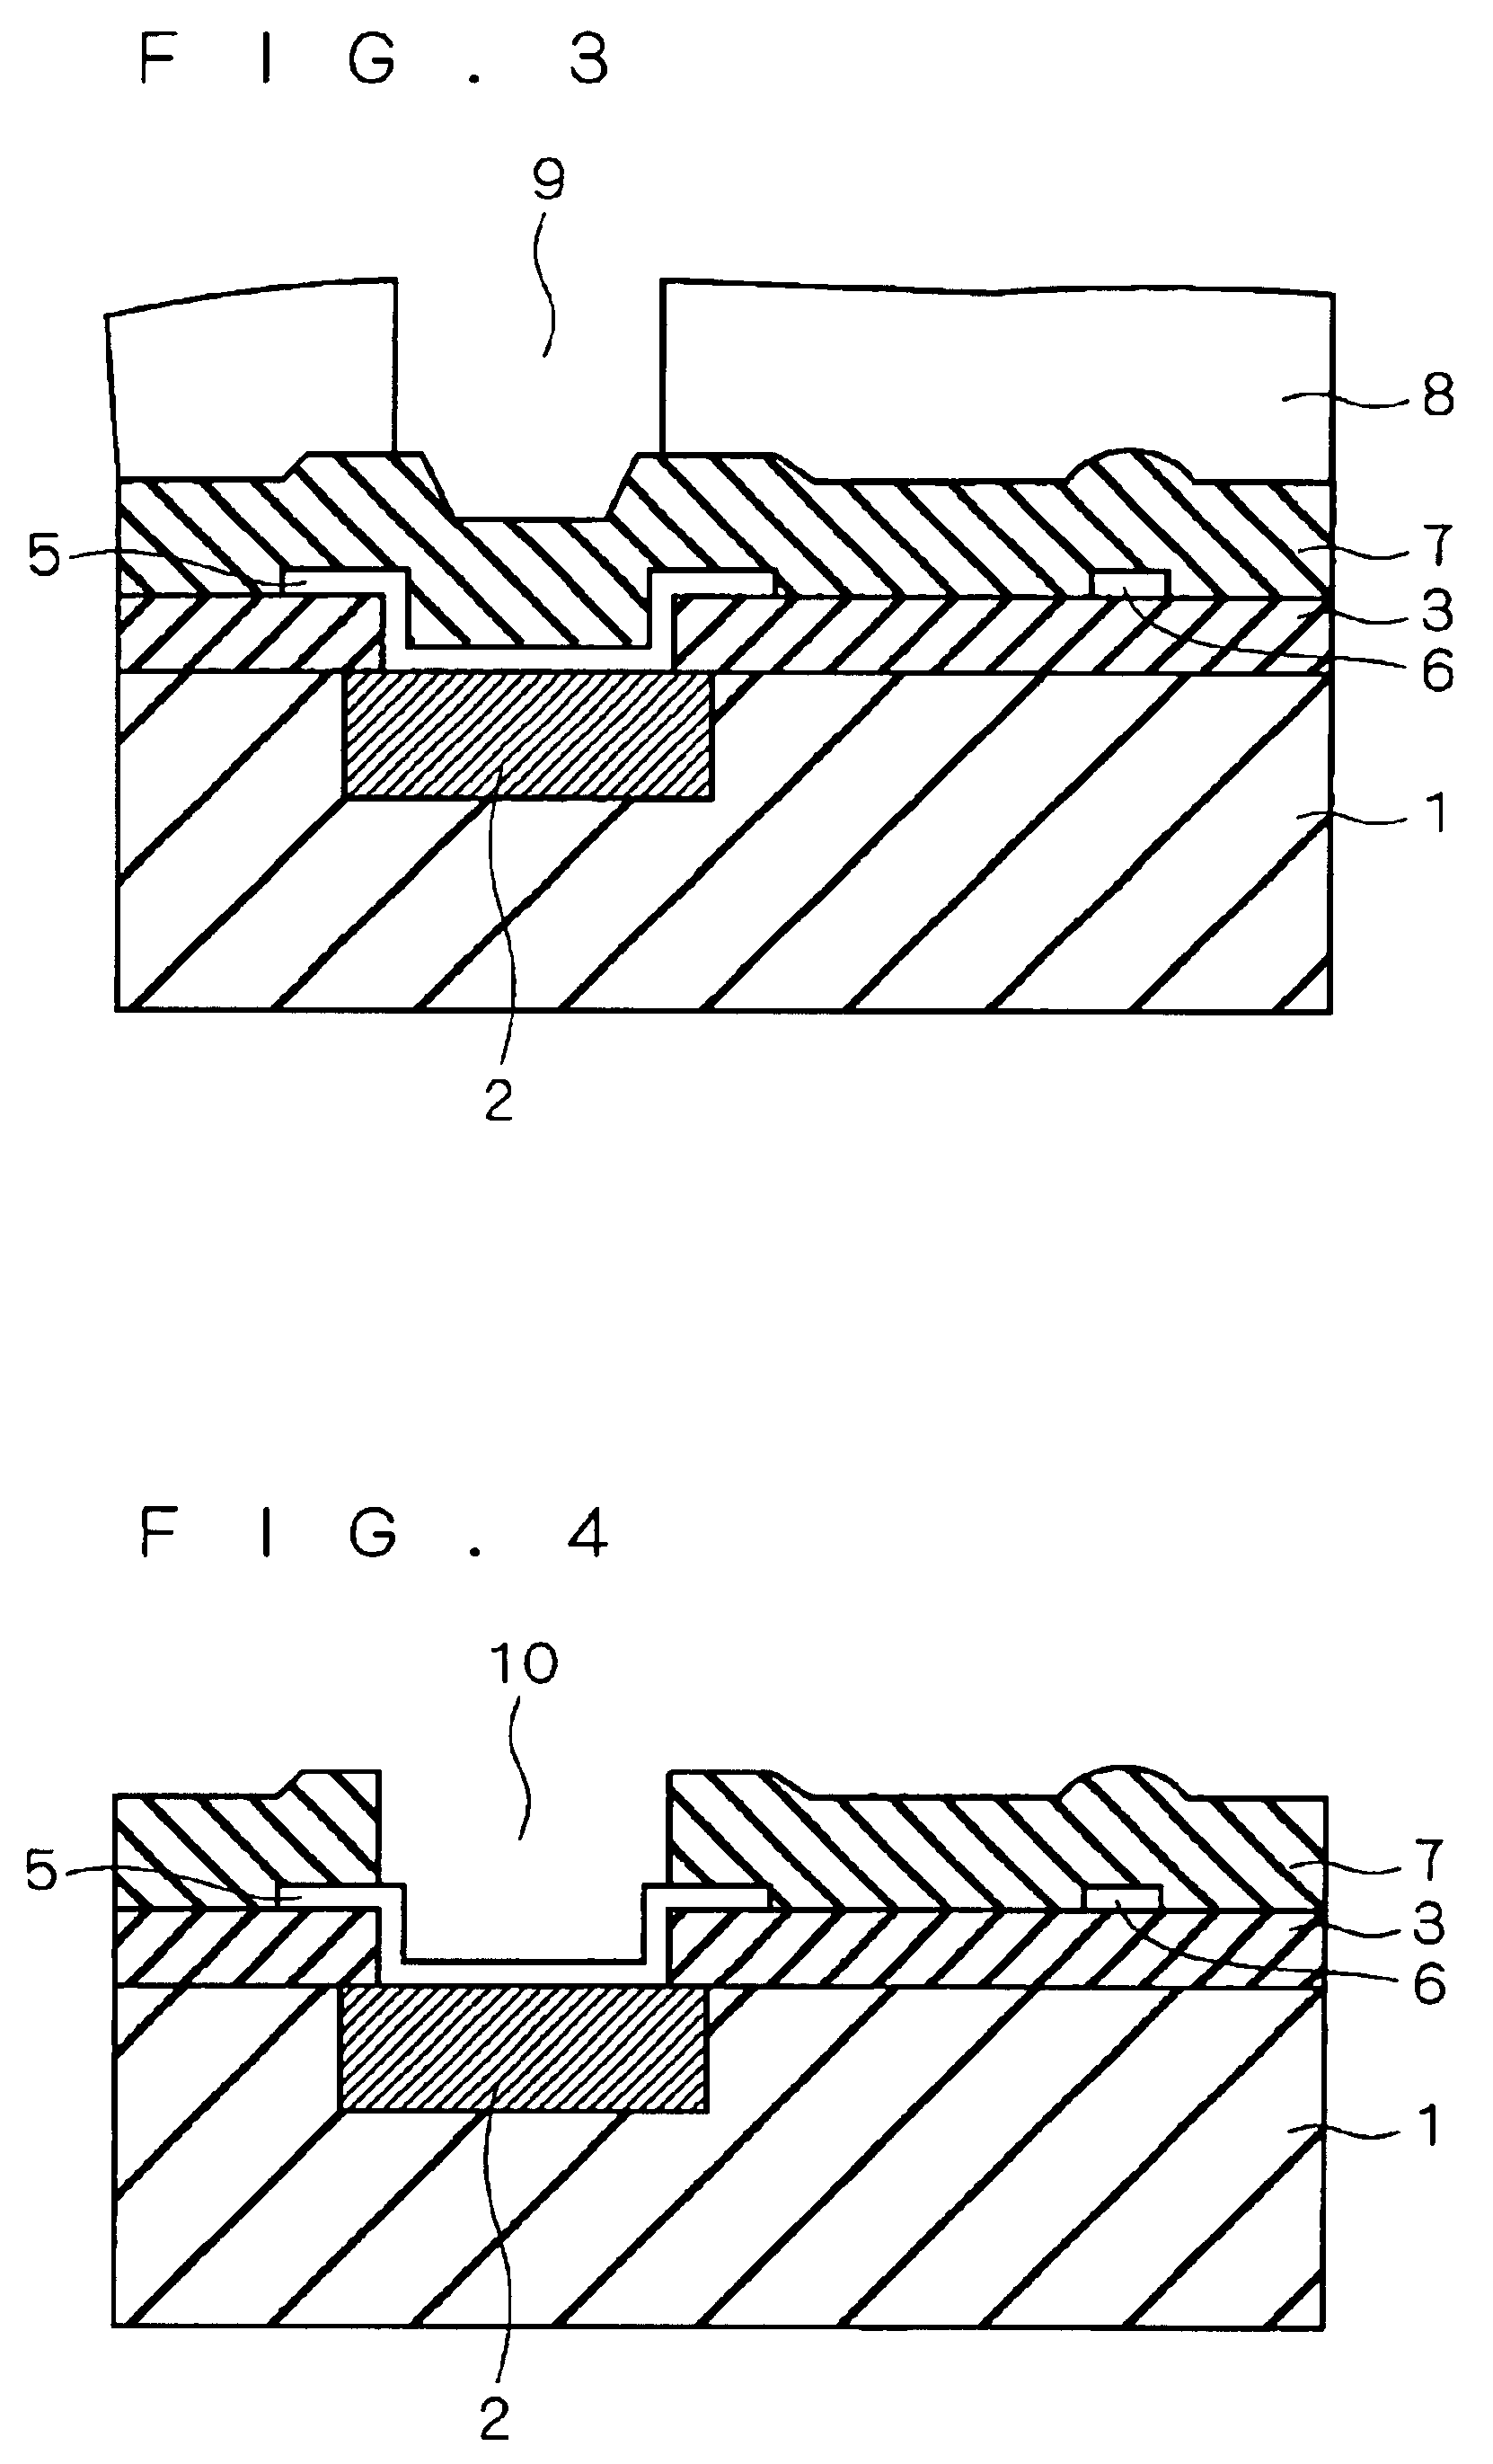 Flip chip mounting method of forming a solder bump on a chip pad that is exposed through an opening formed in a polyimide film that includes utilizing underfill to bond the chip to a substrate